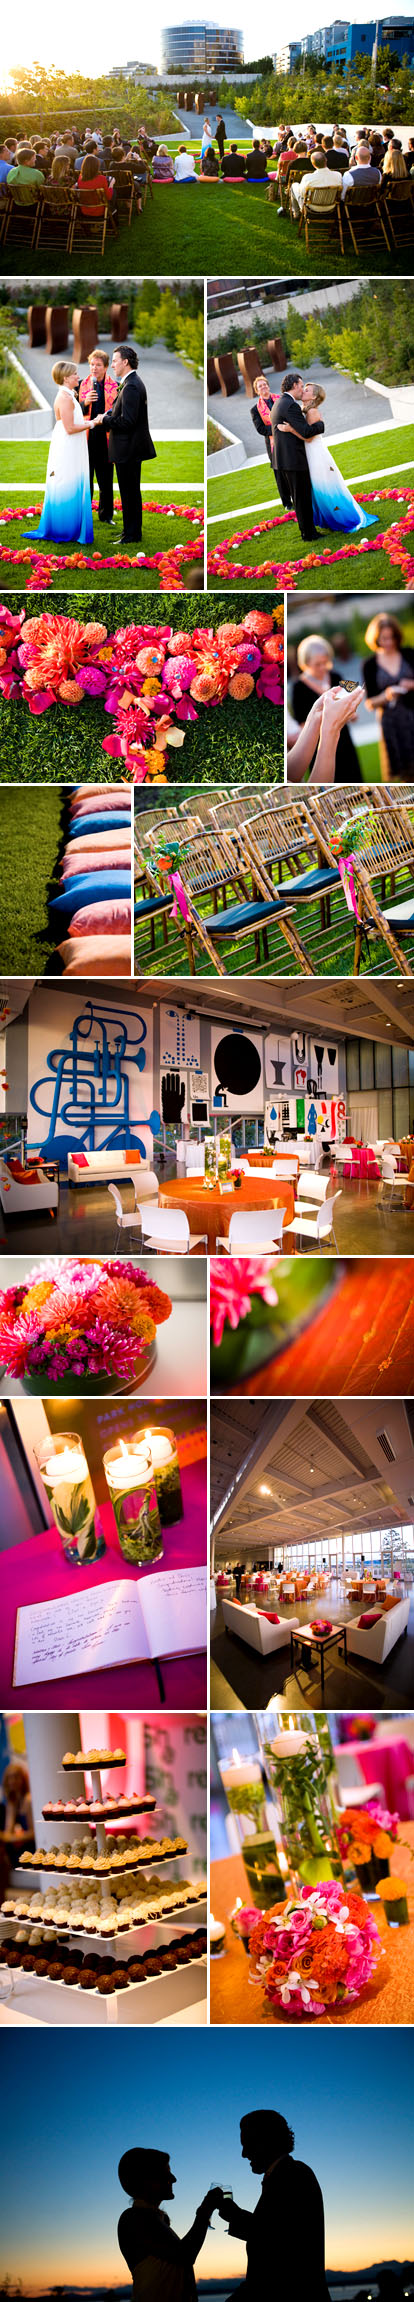 Stephanie Cristalli Photography, Indian inspired summer wedding, Olympic Sculpture Park Seattle